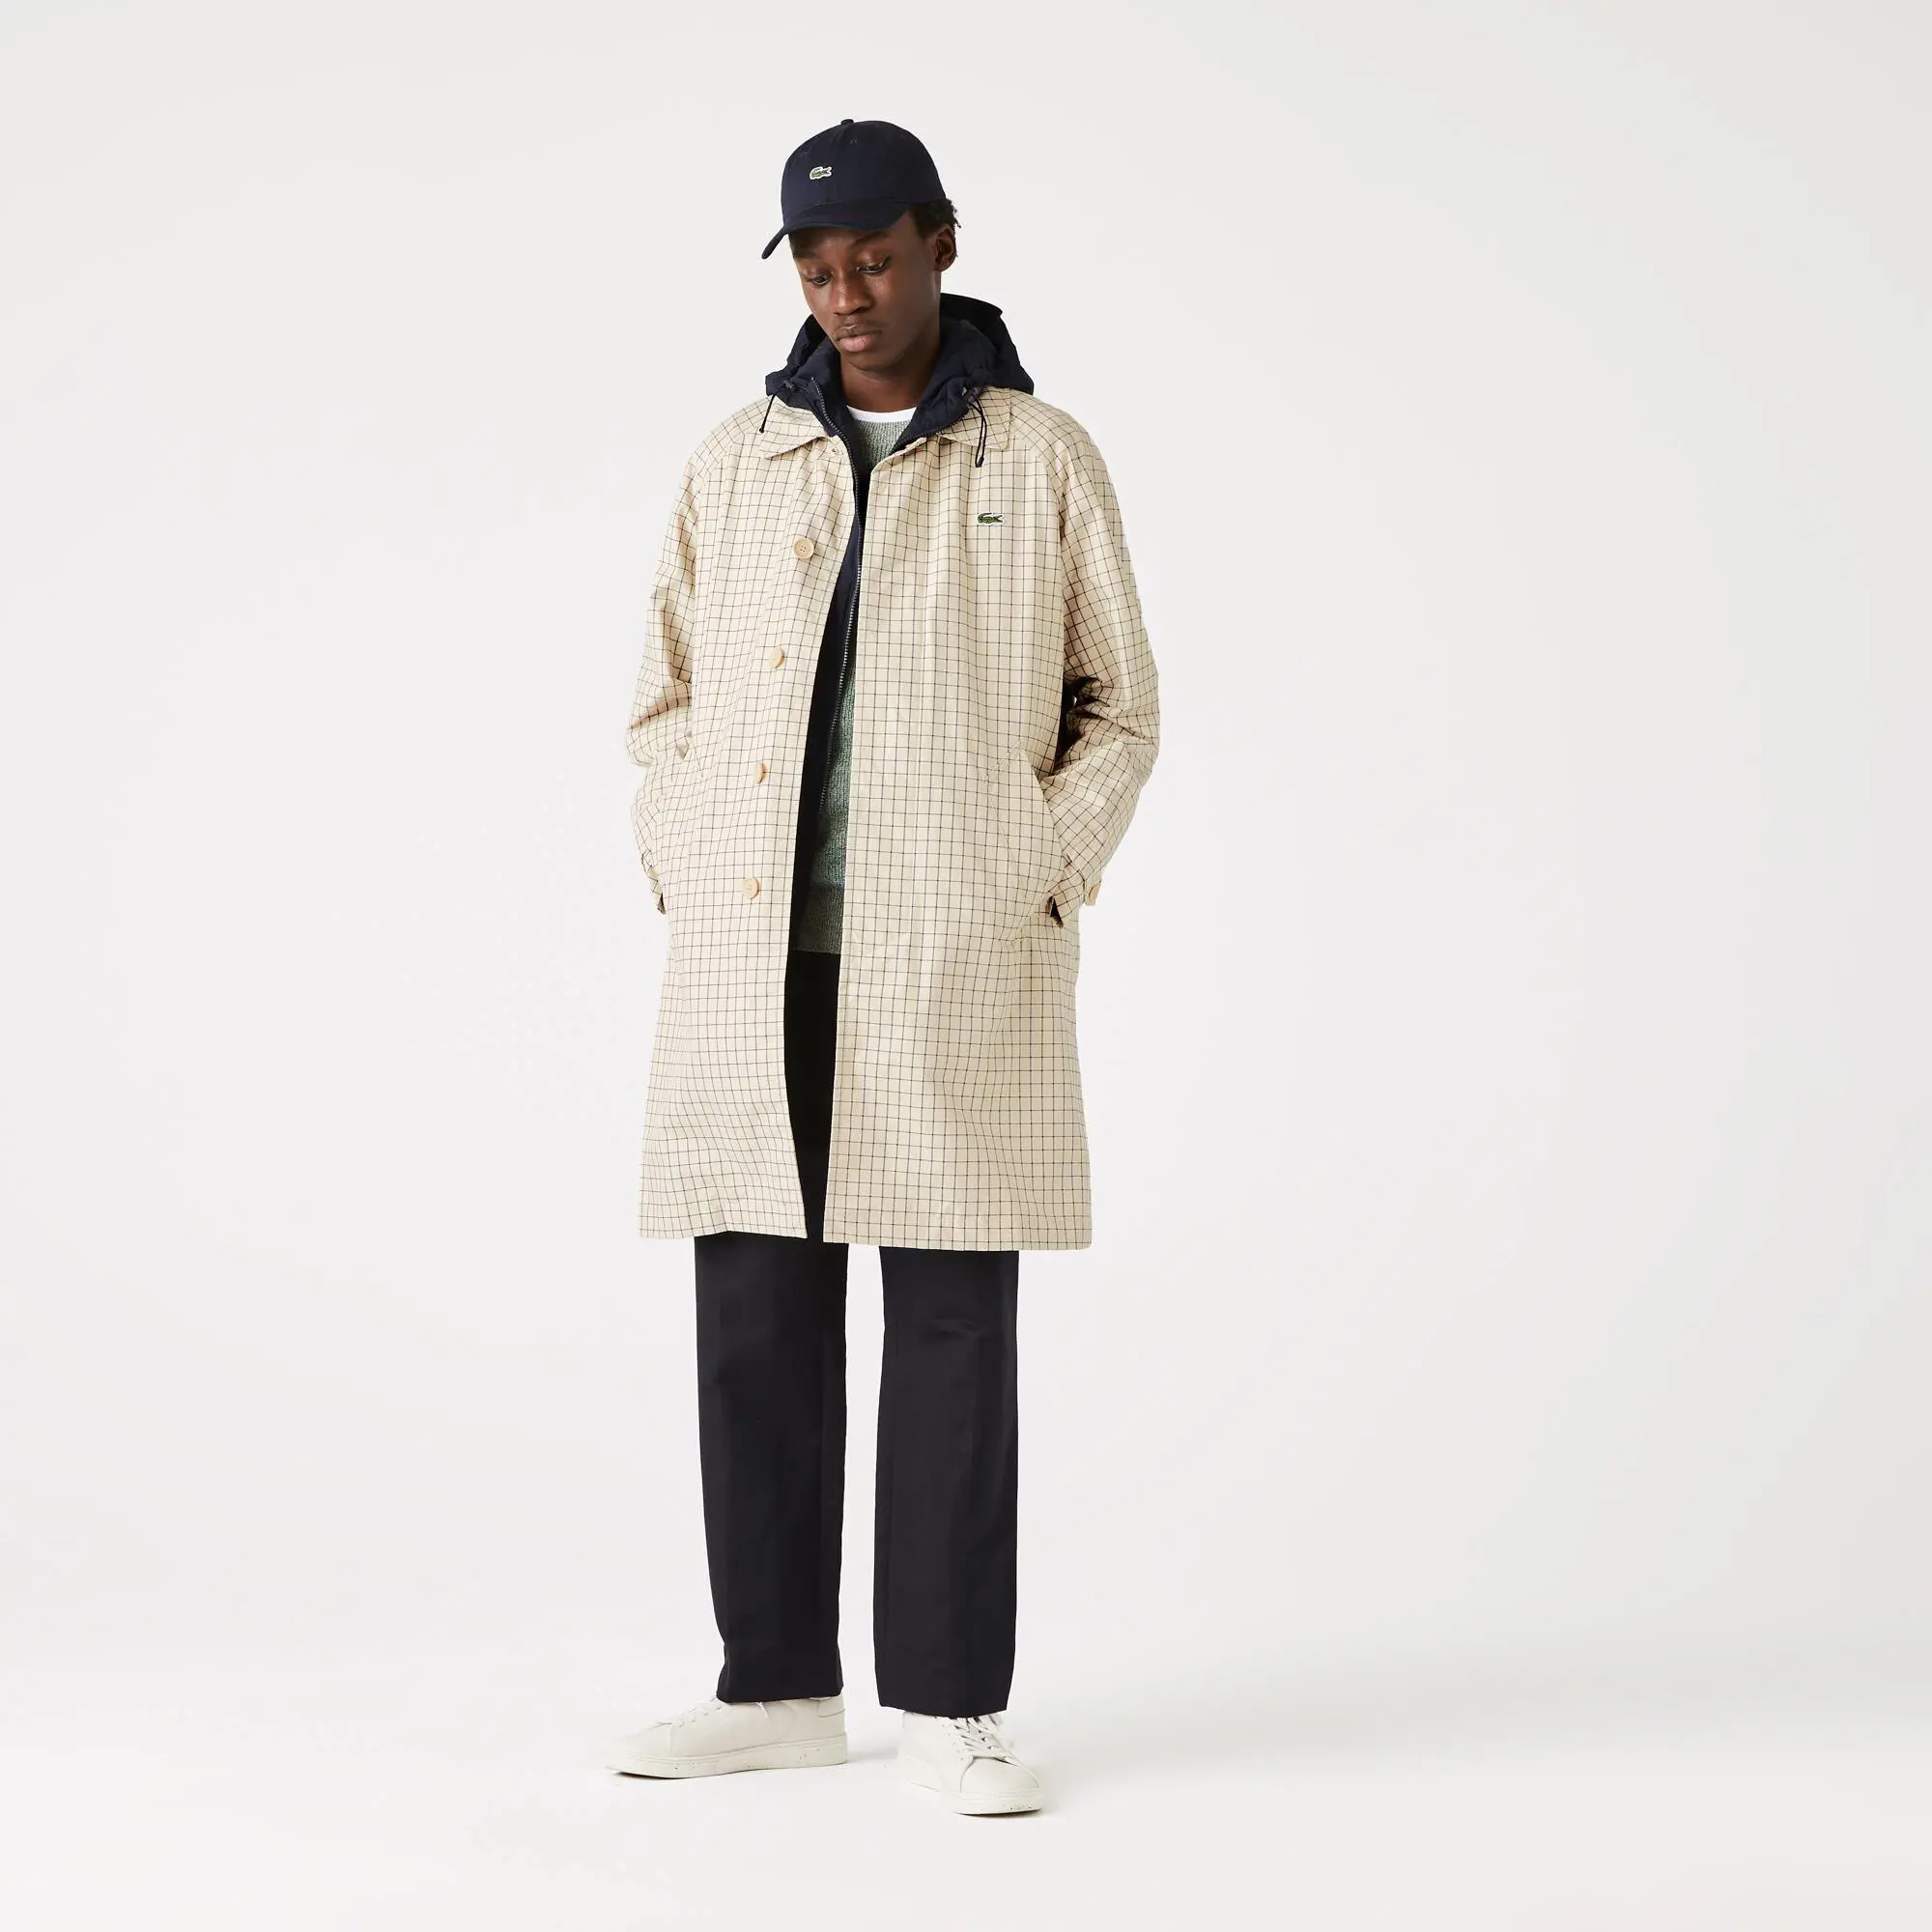 Lacoste Men’s Heritage 3-in-1 Check Trench. 1